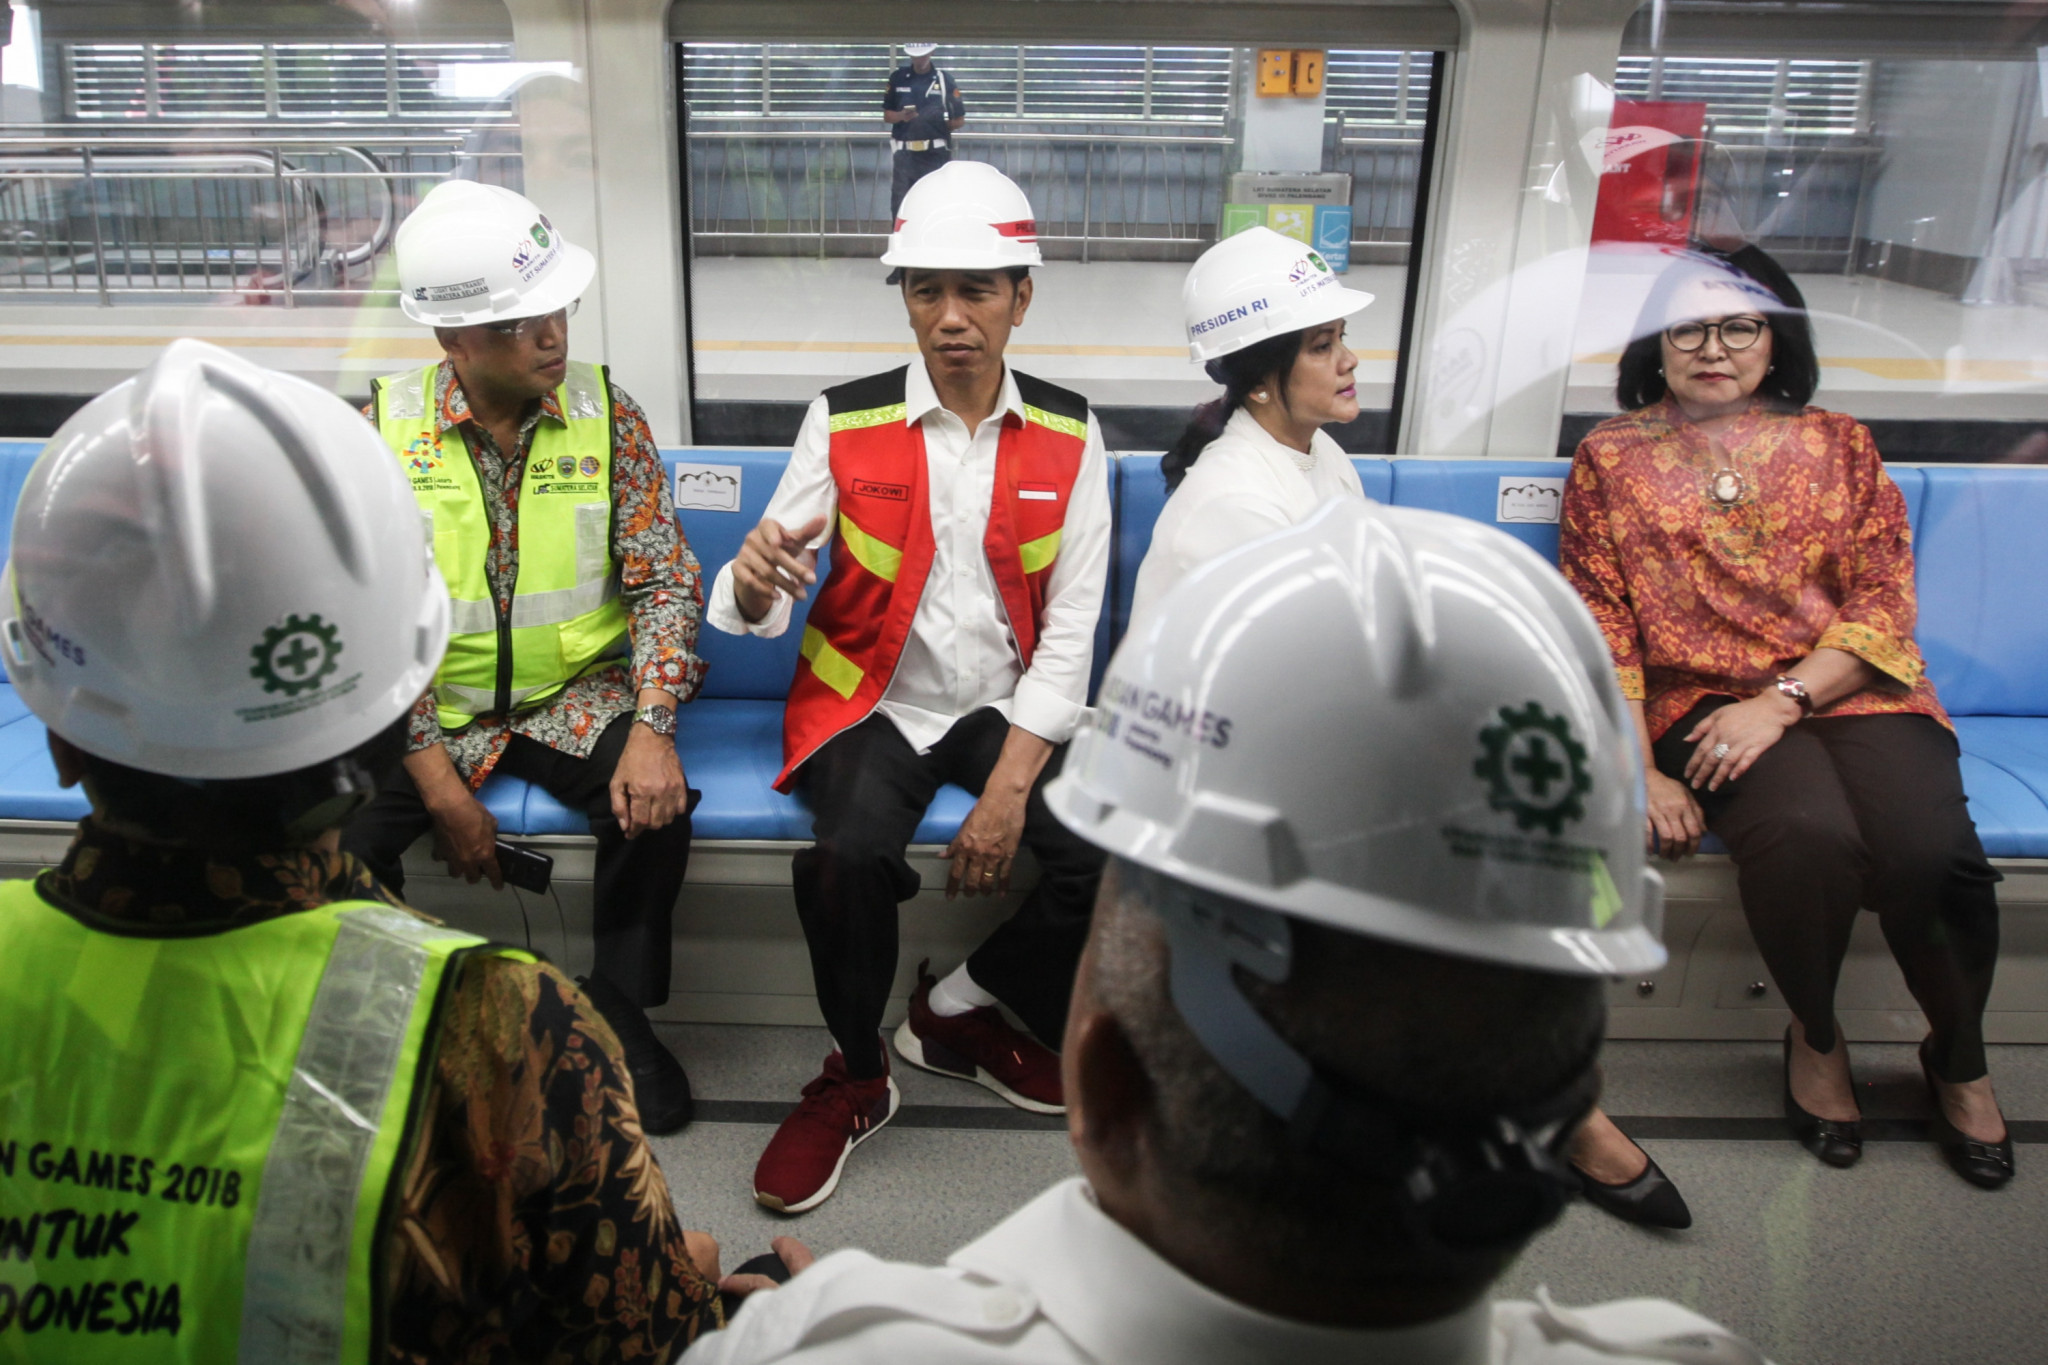 Indonesia's President Joko Widodo, second from left, sits inside a LRT rail car at Jakabaring station in Palembang ©Getty Images